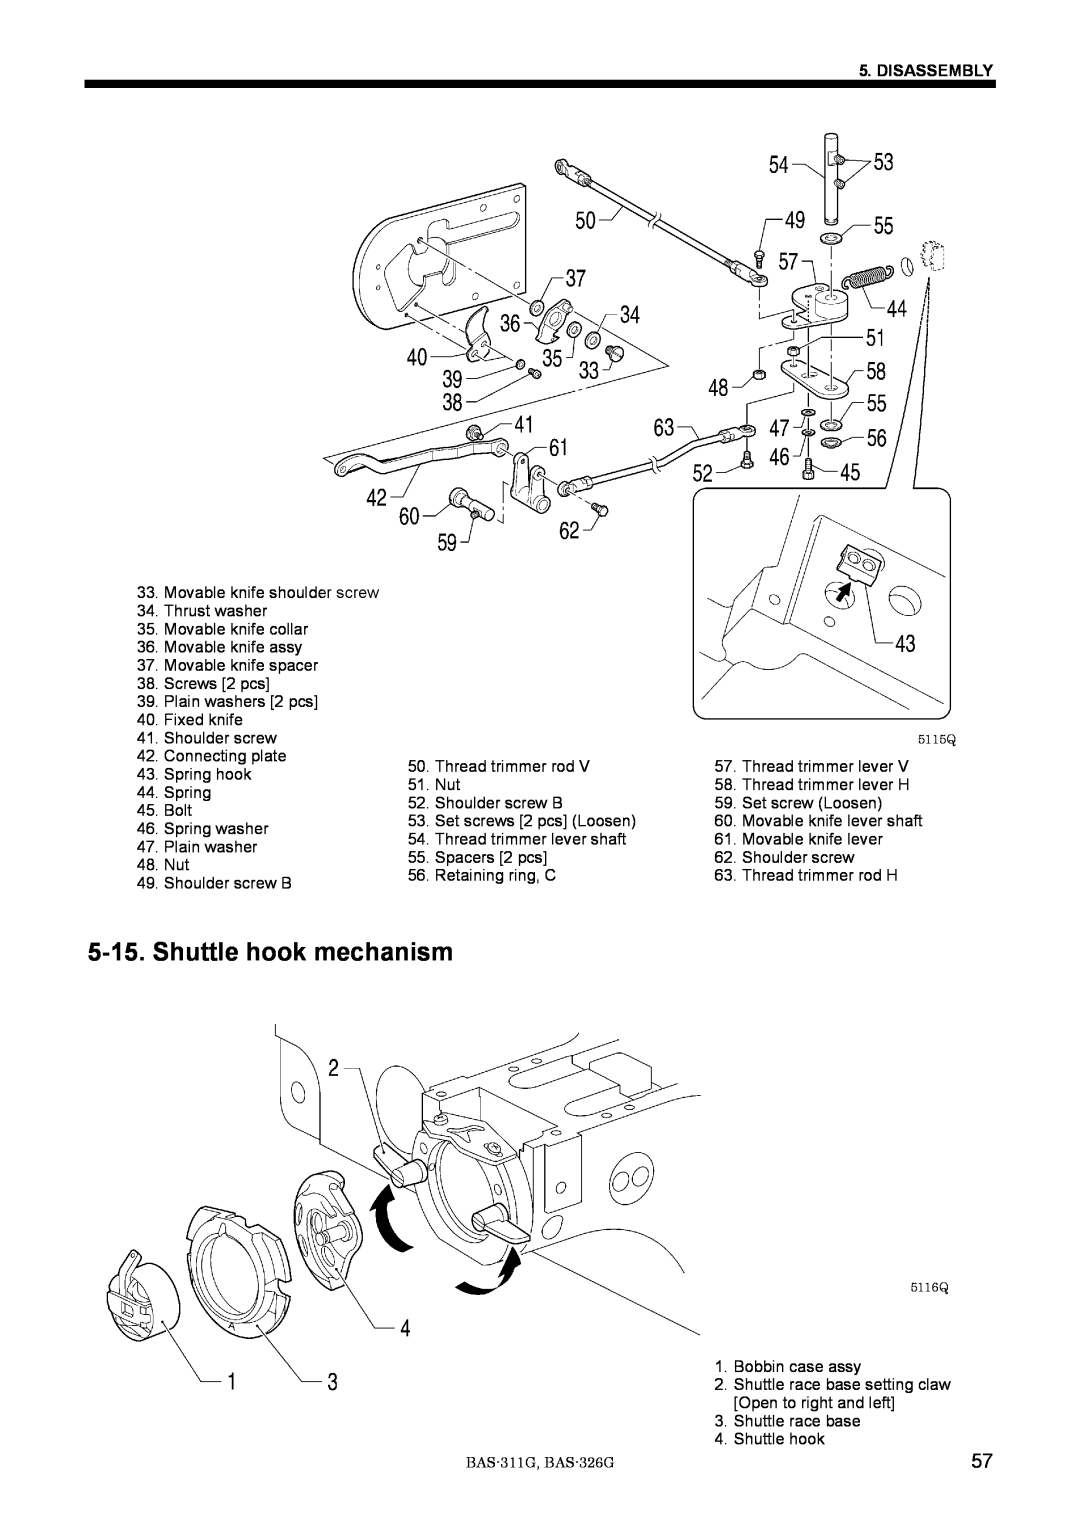 Brother BAS-311G service manual Shuttle hook mechanism, Disassembly 